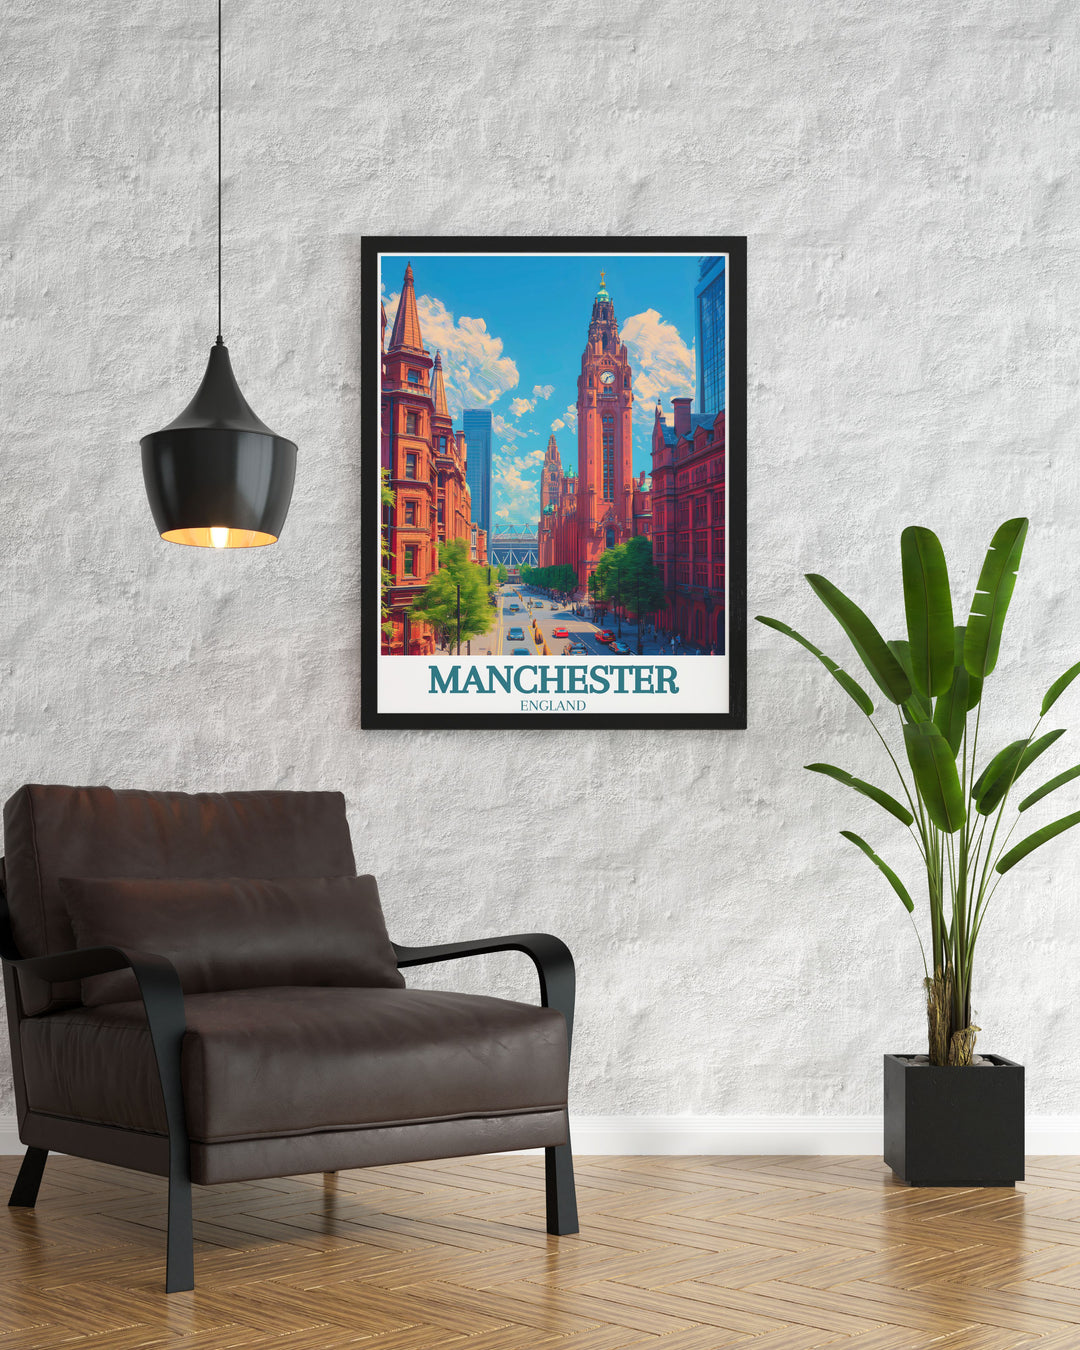 Vintage print of Manchester town hall capturing the essence of the citys grandeur and charm perfect for art lovers and collectors who appreciate detailed craftsmanship.